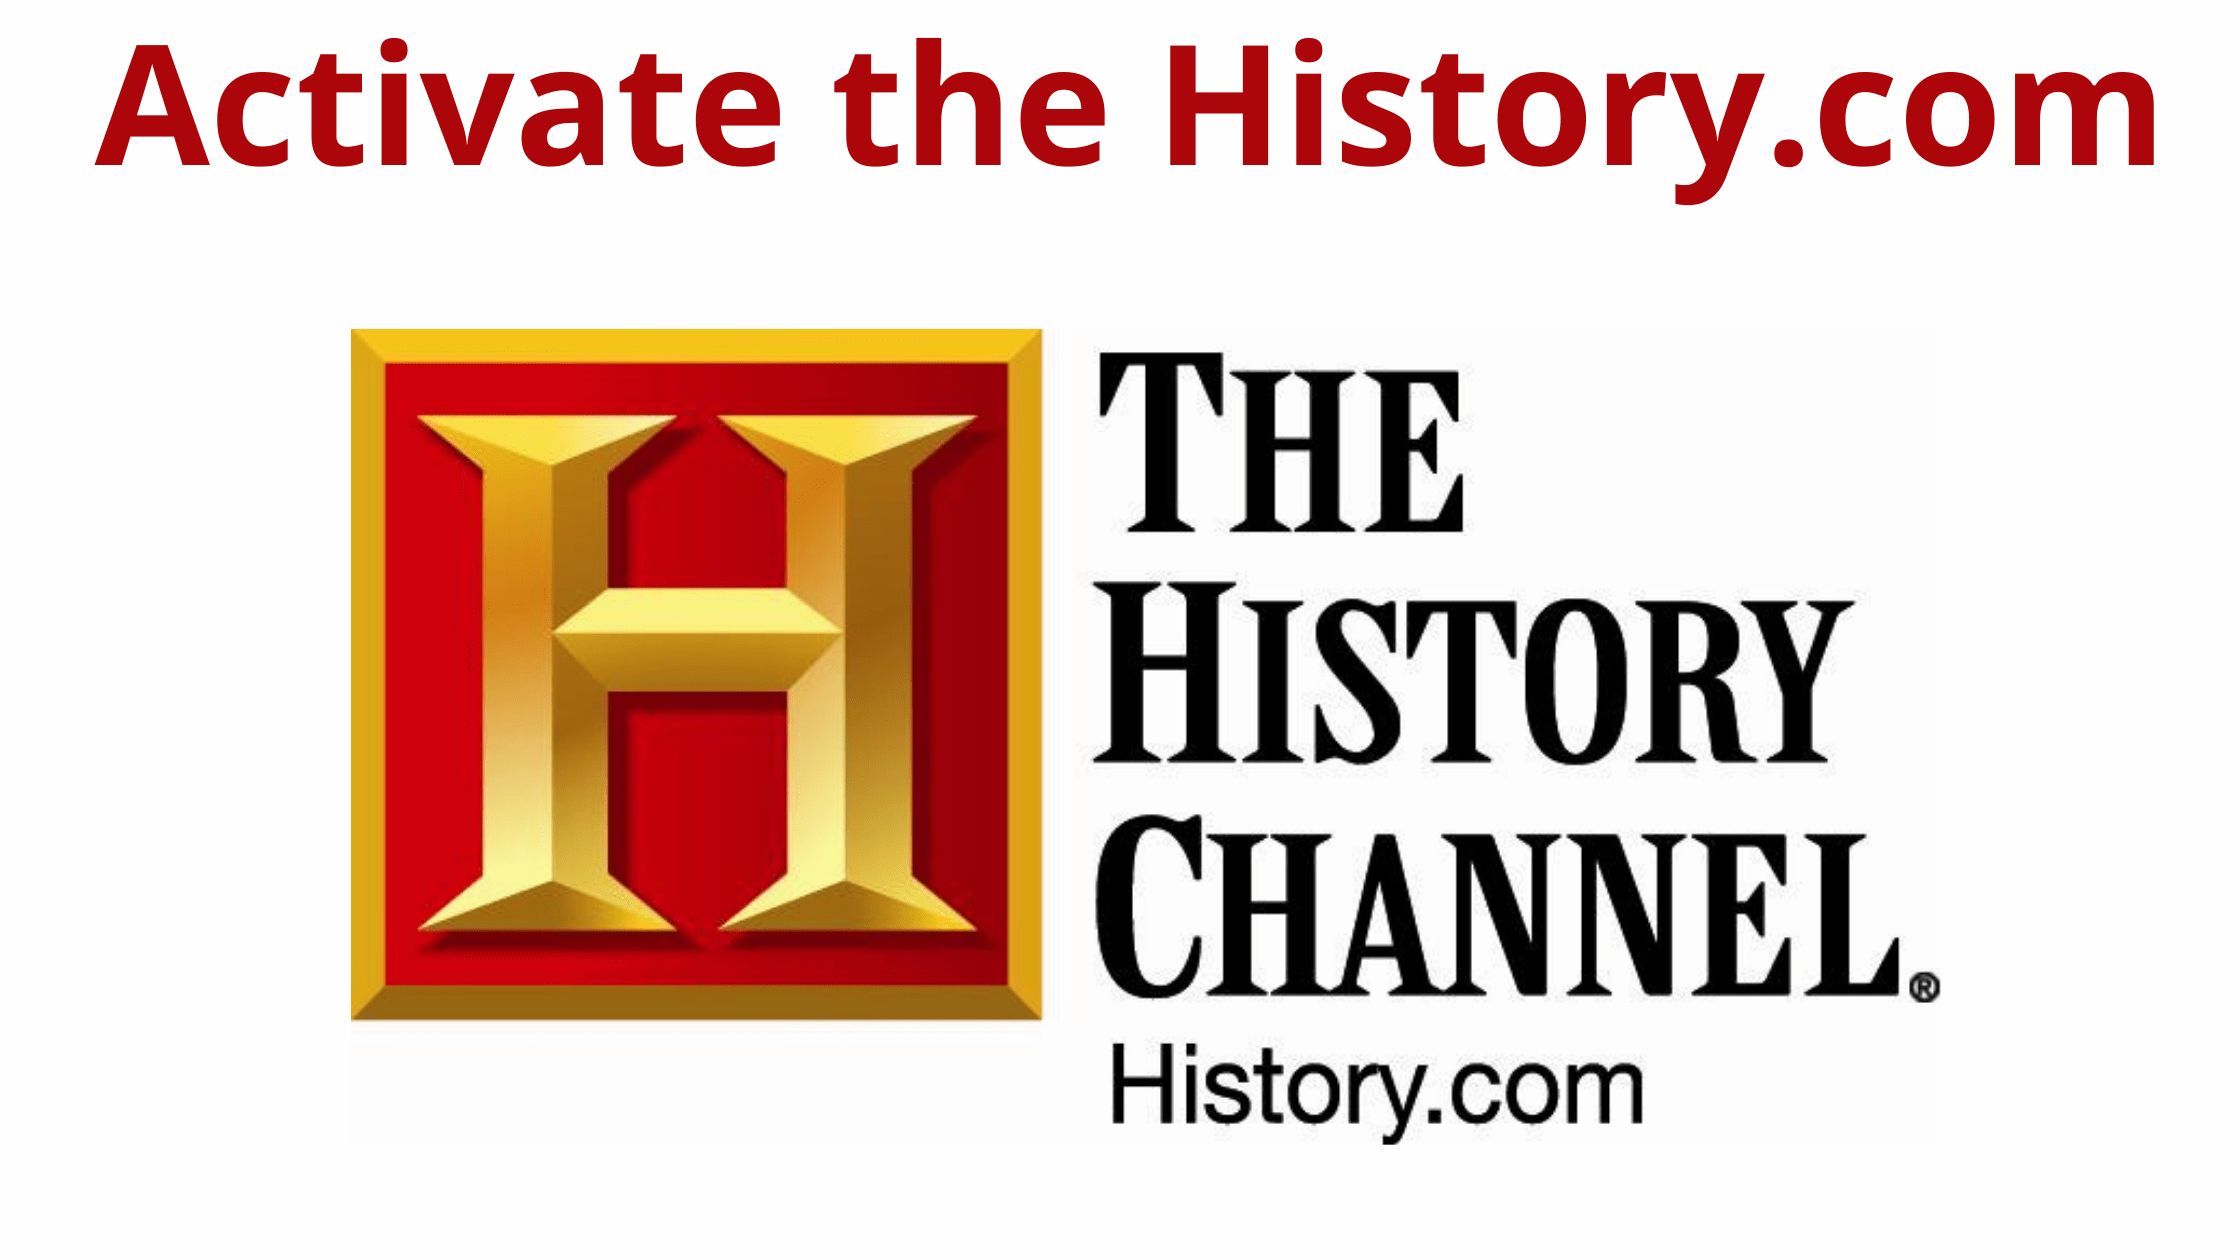 Activate the History.com